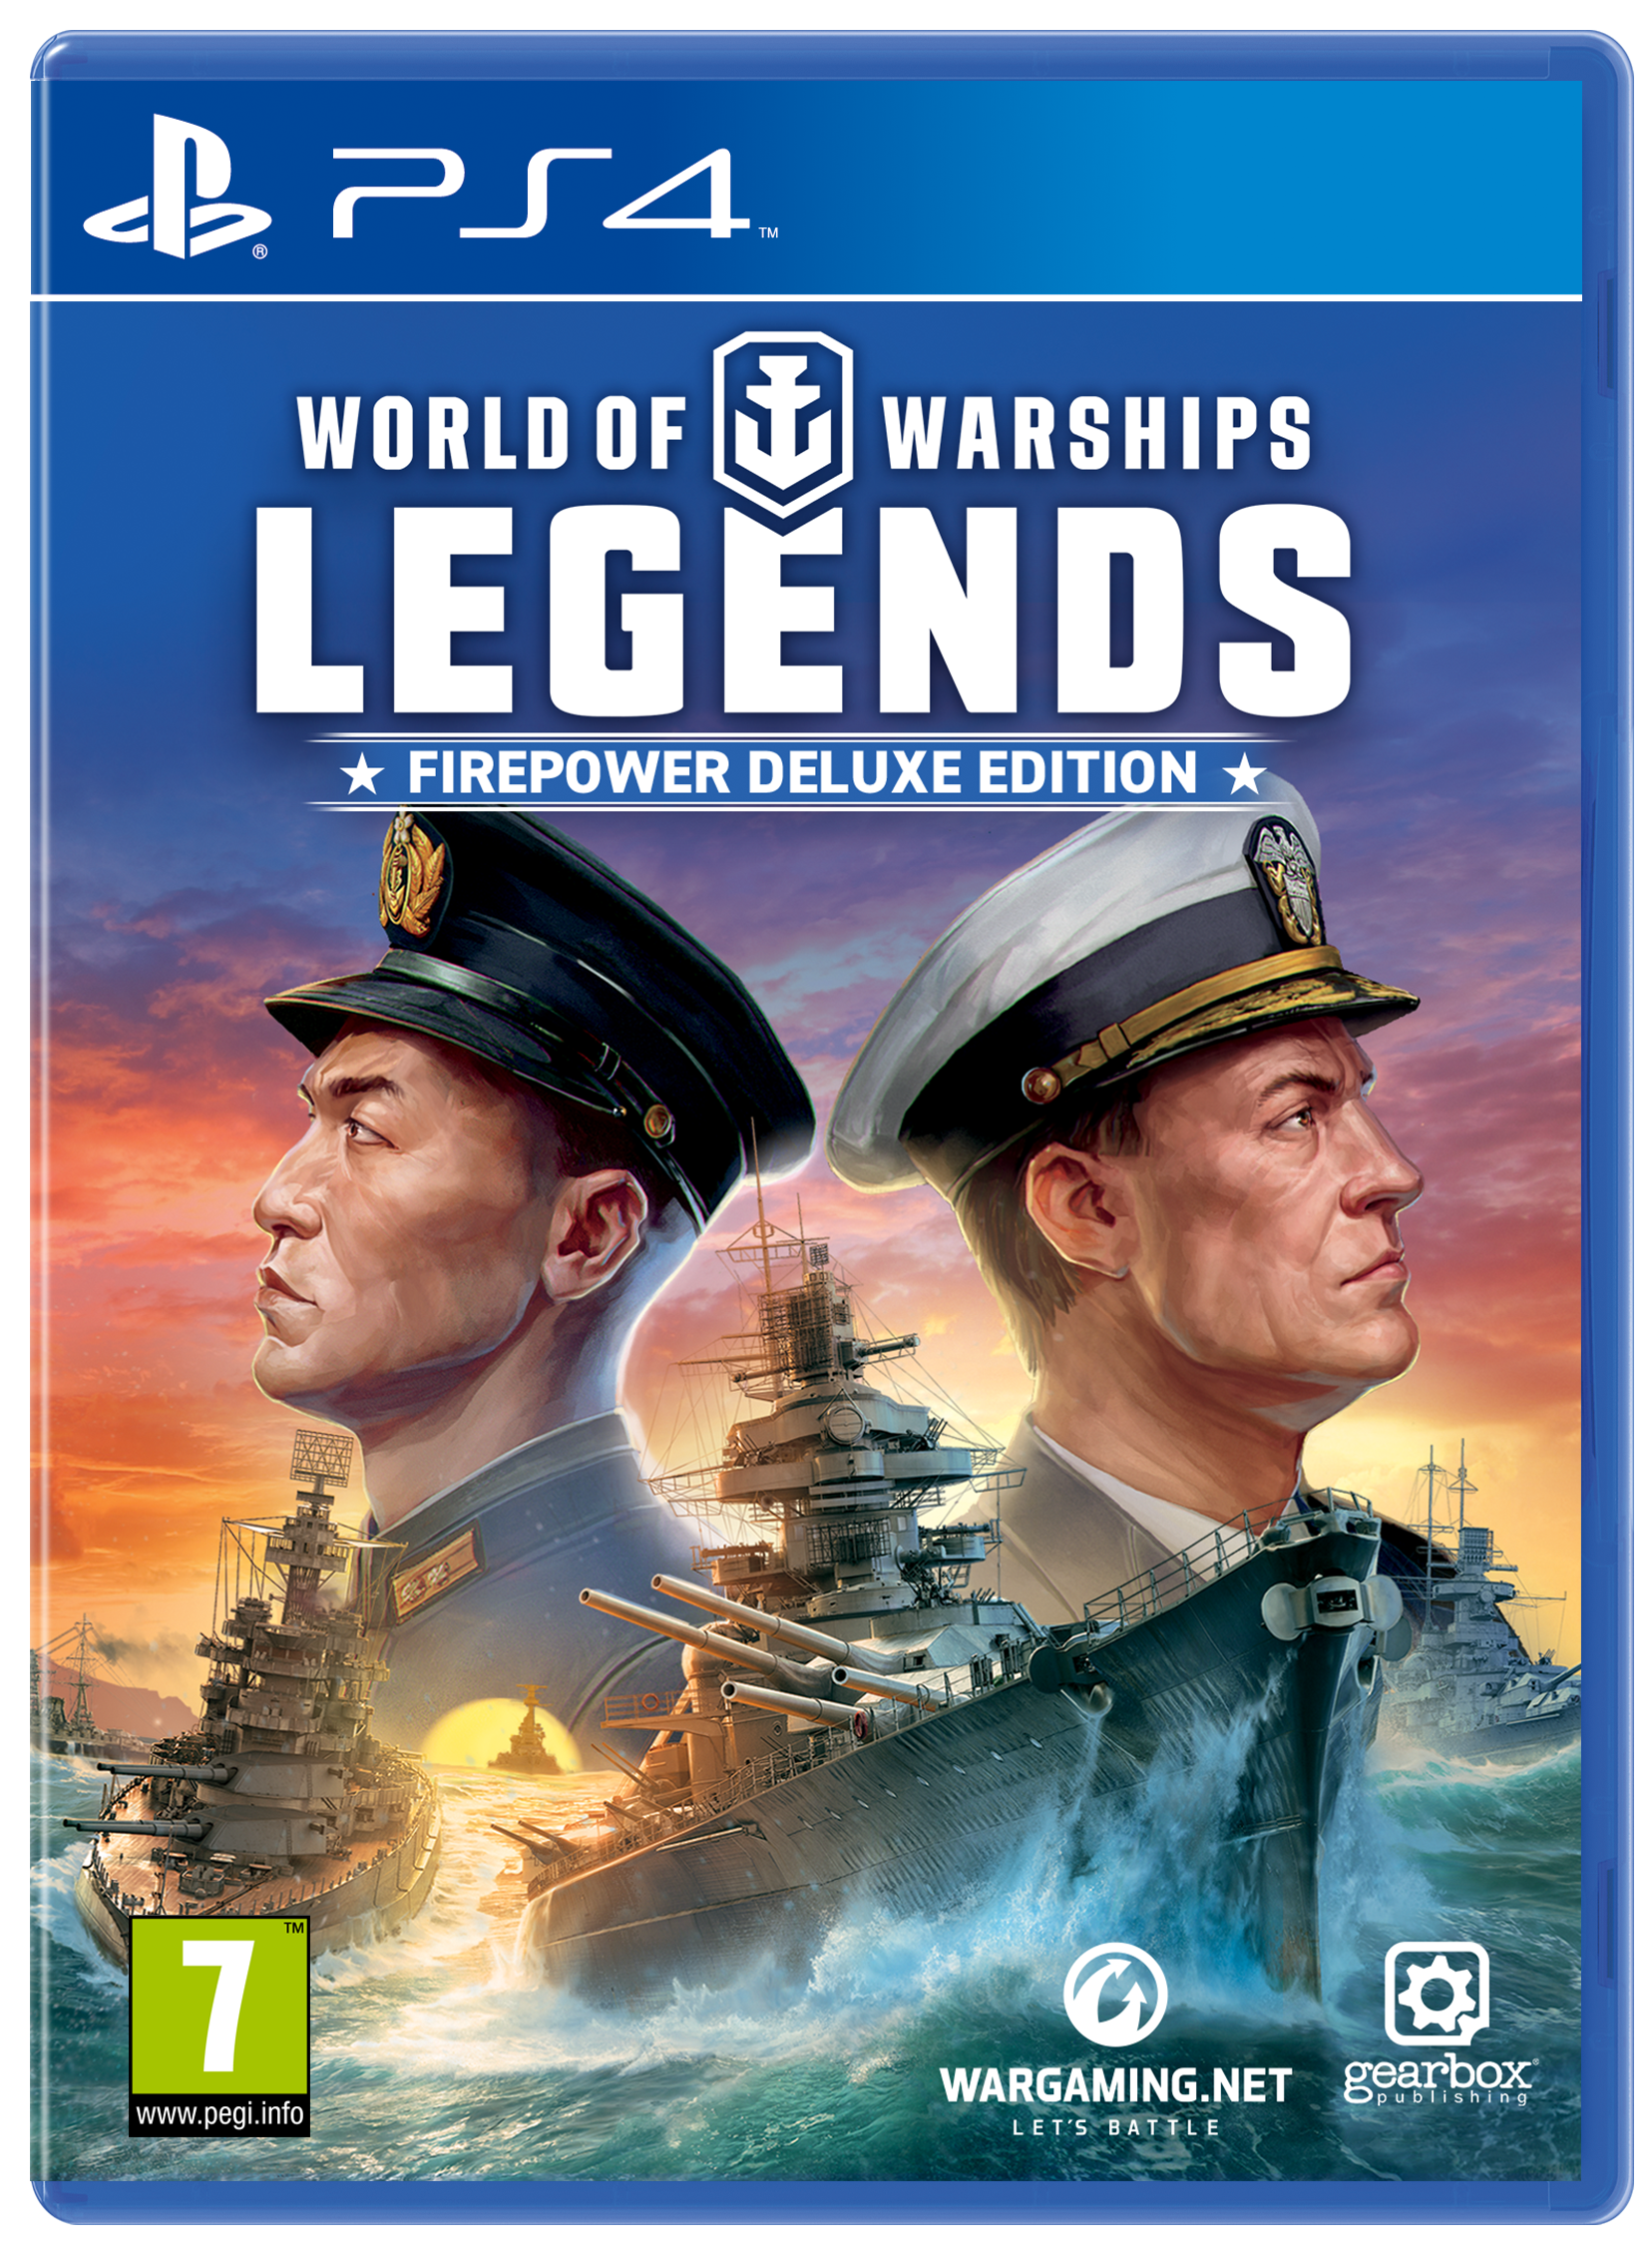 world of warships legends free codes 2021